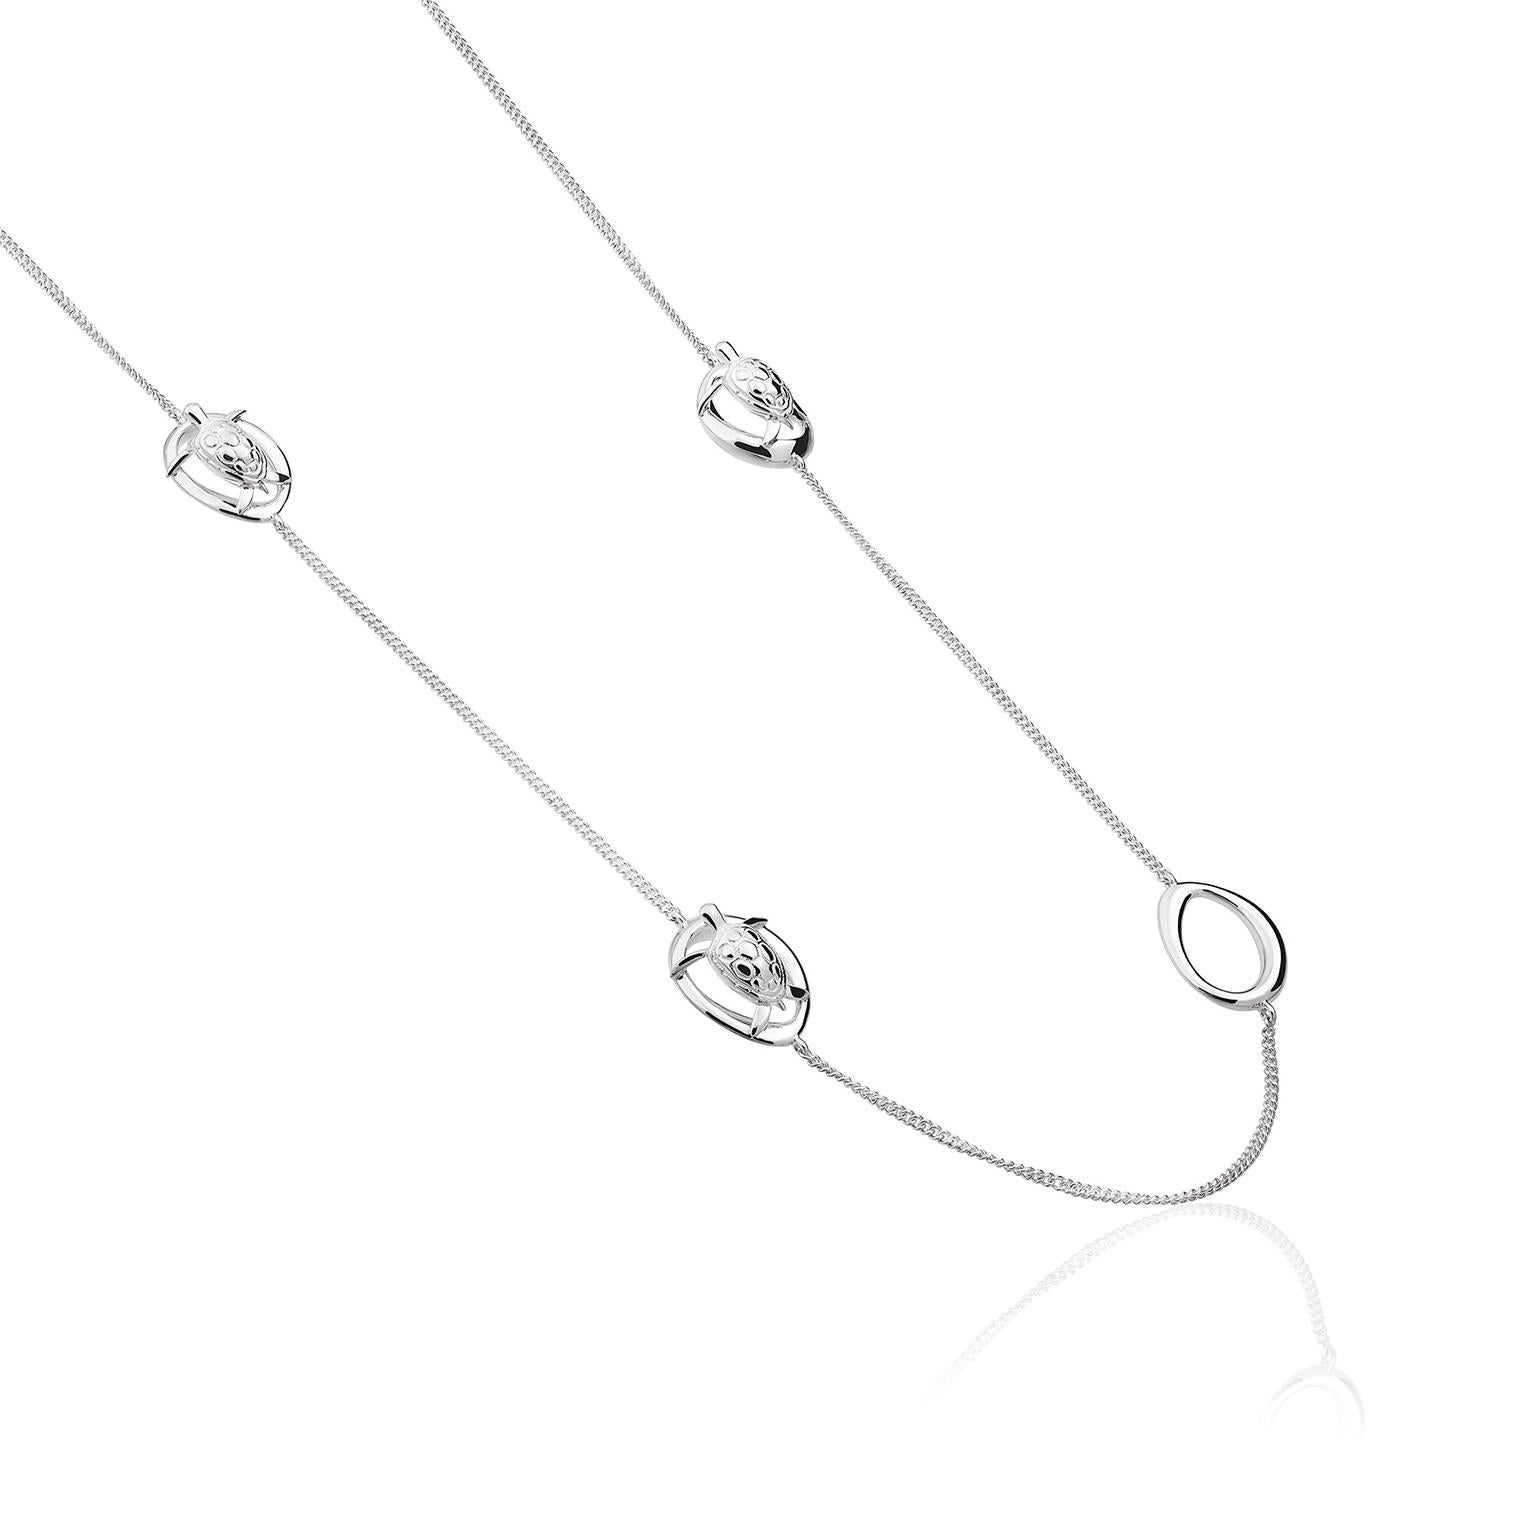 The Turtle Necklace from the Animales Collection by TANE is made in sterling silver. It consists of an 31.4